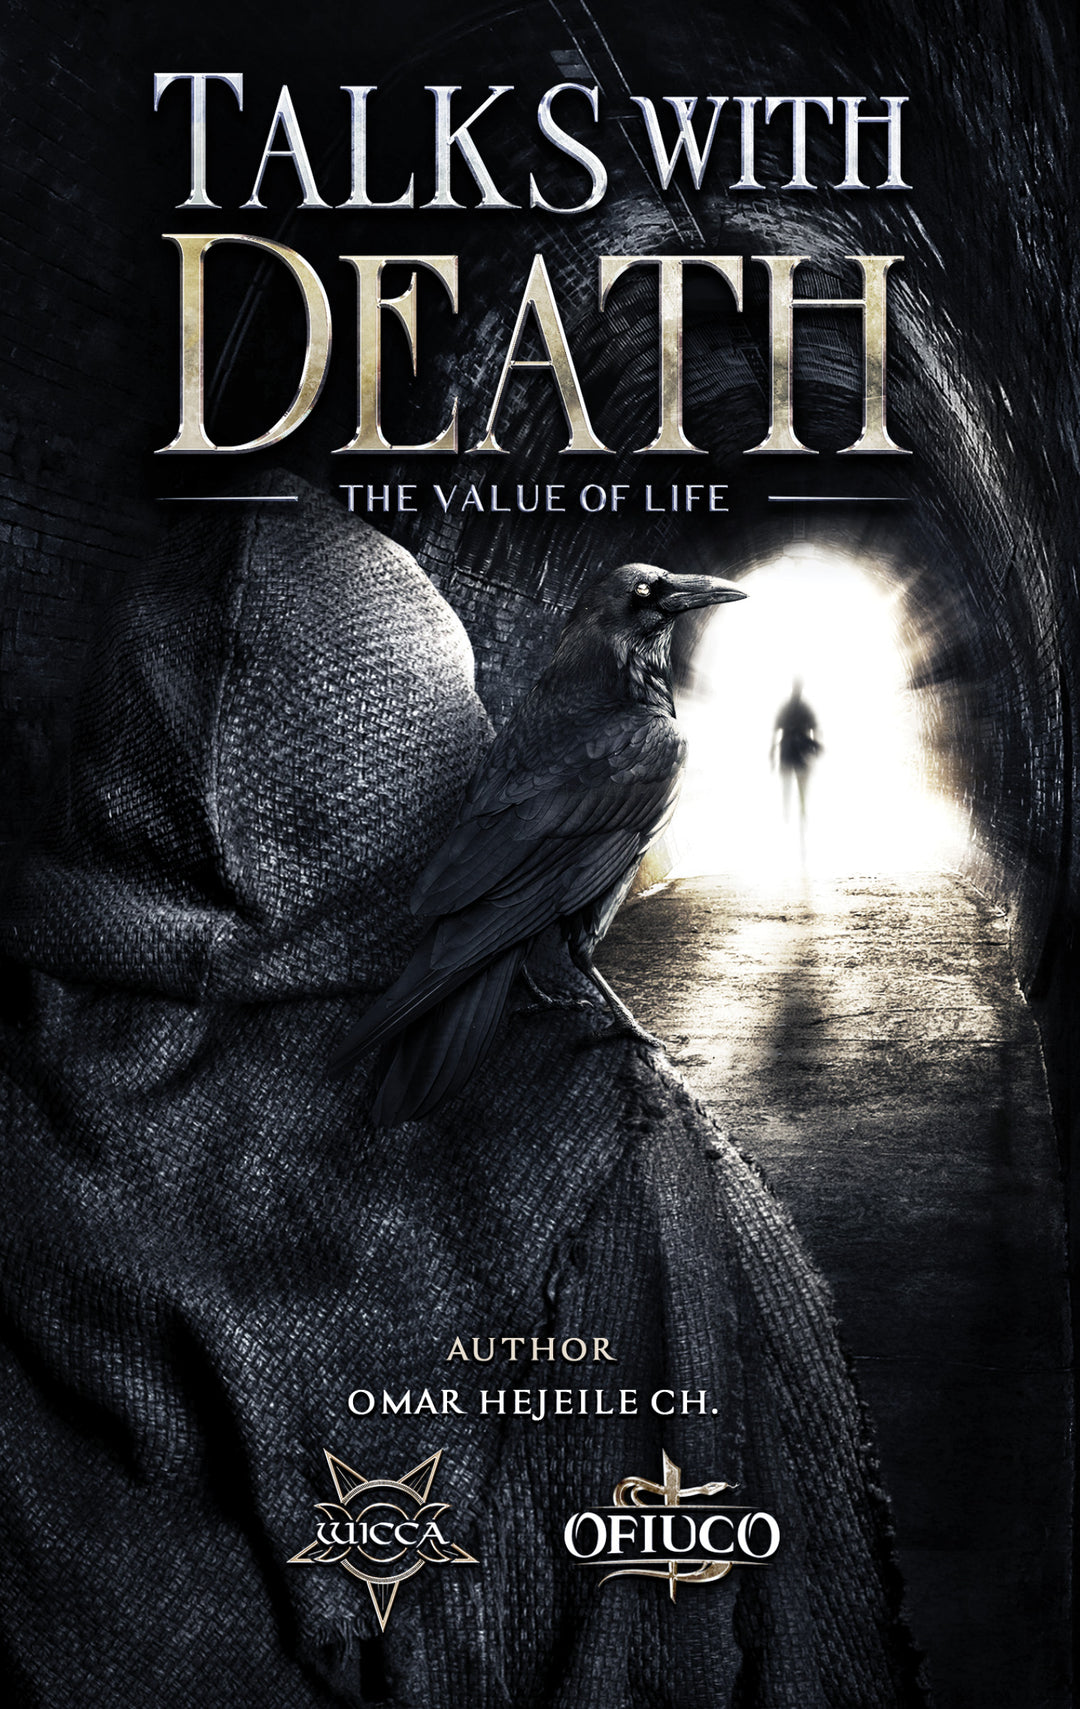 Book: The Value of Life, Talking to Death